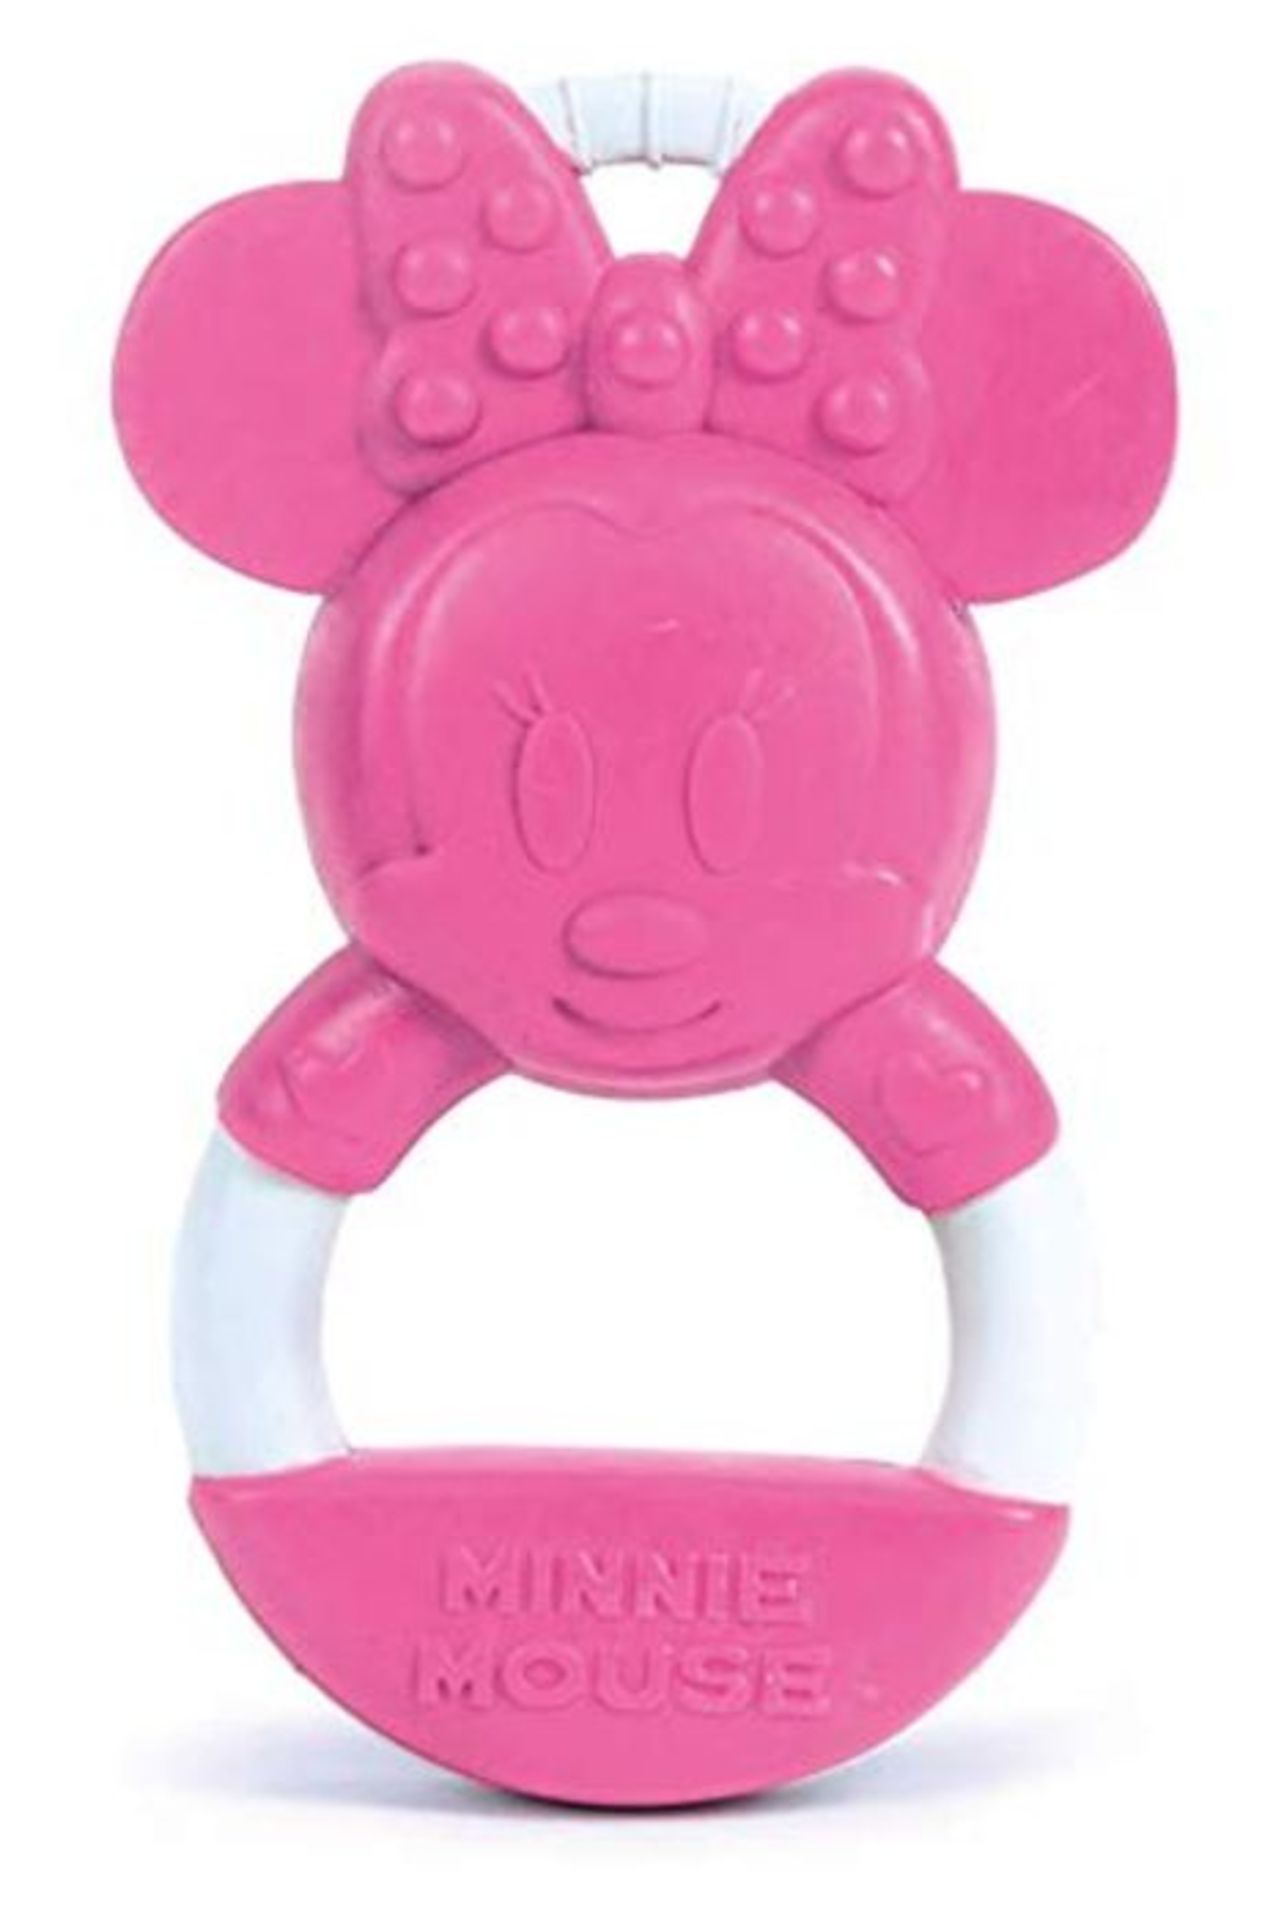 Clementoni 17342 -Disney Minnie New-Born Toys-Baby teether Suitable for 0 Months and O